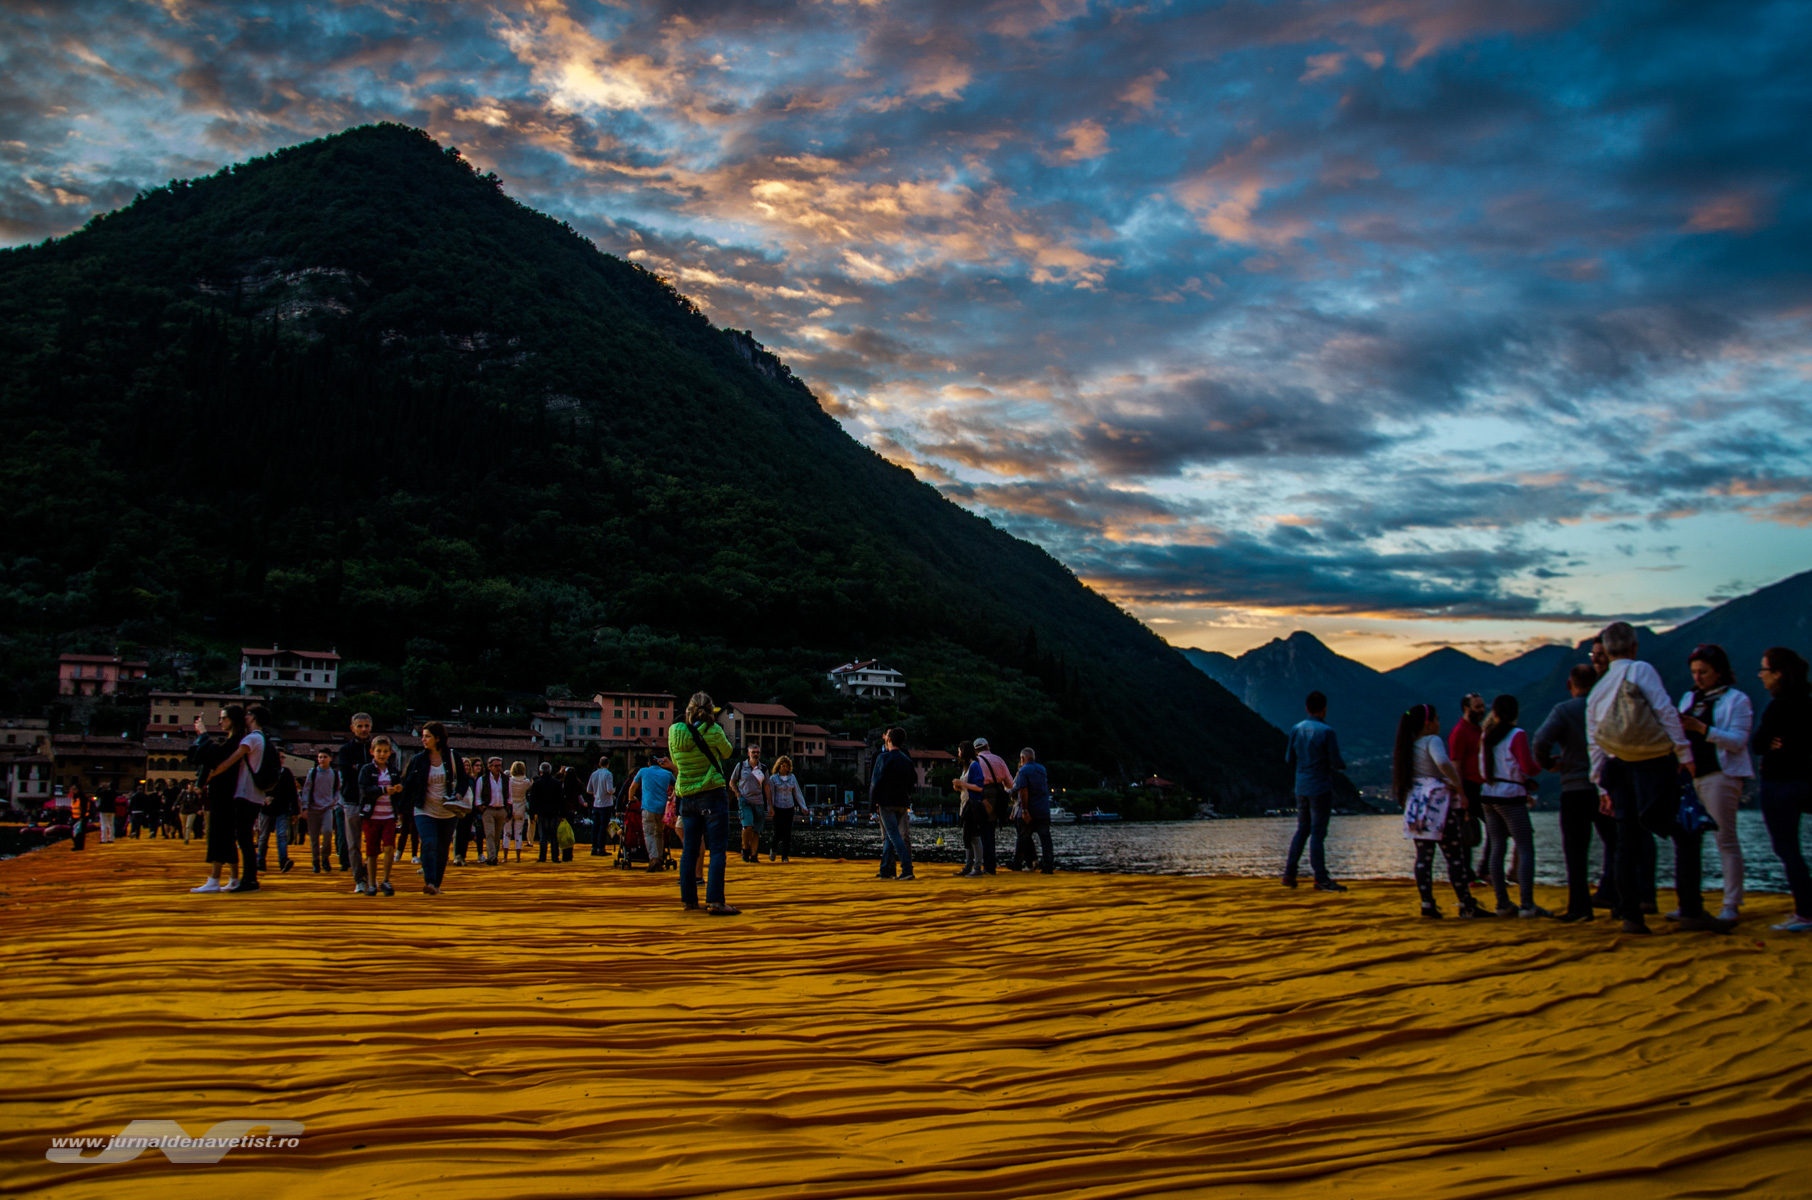 The Floating Piers 7970